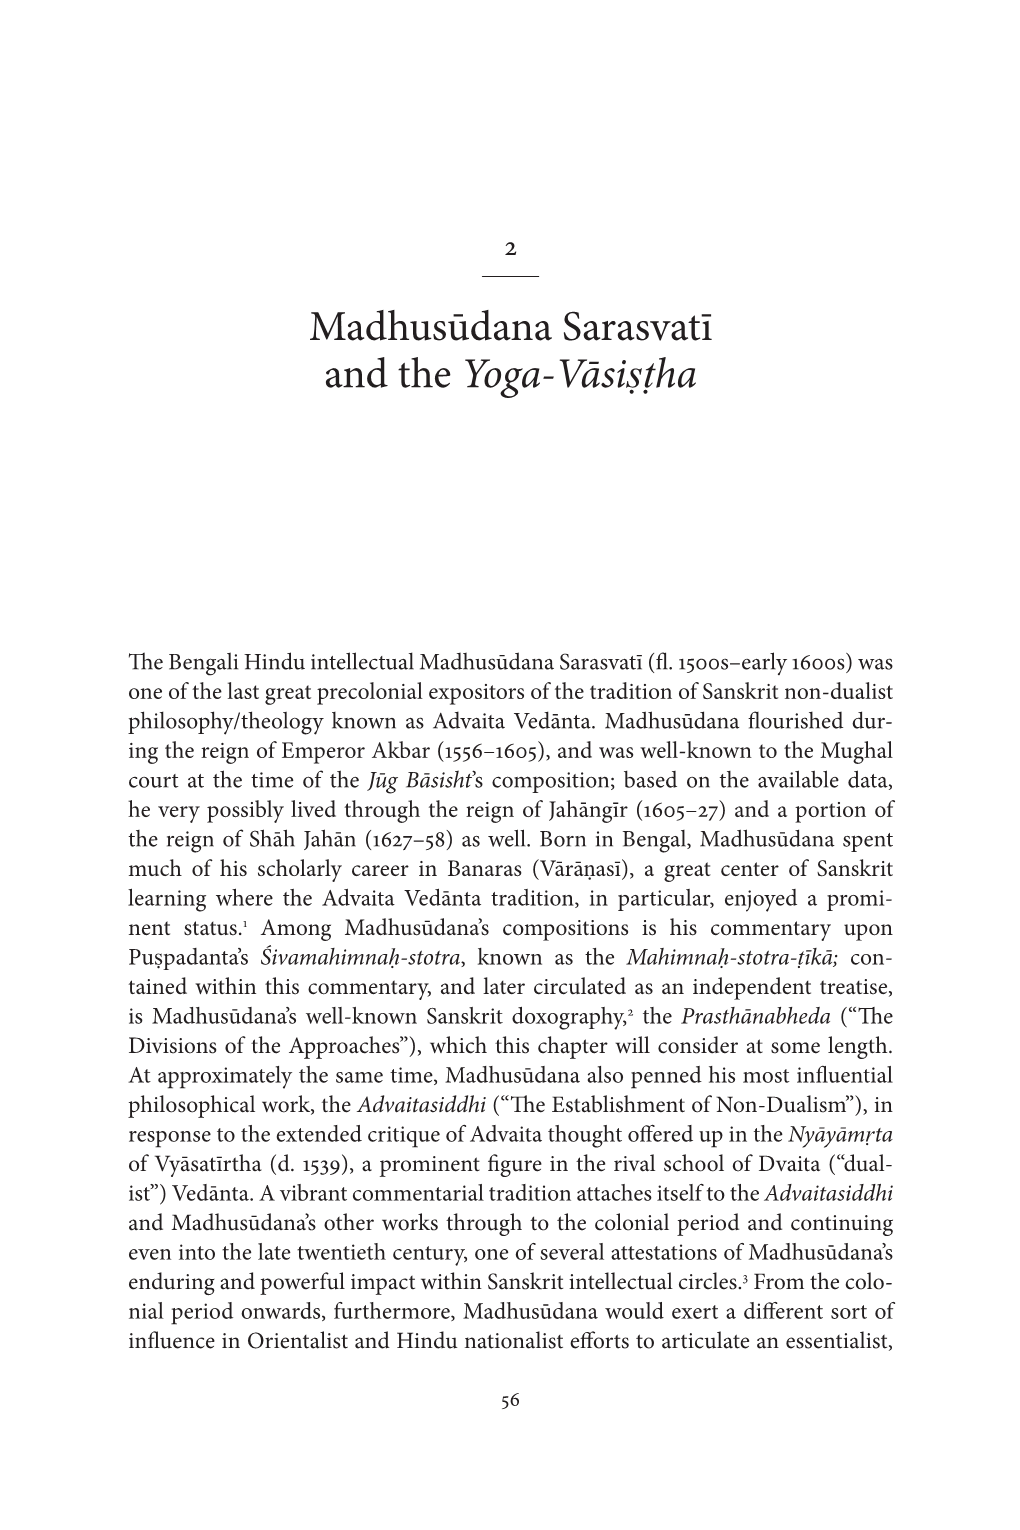 Hindu-Muslim Intellectual Interactions in Early Modern South Asia